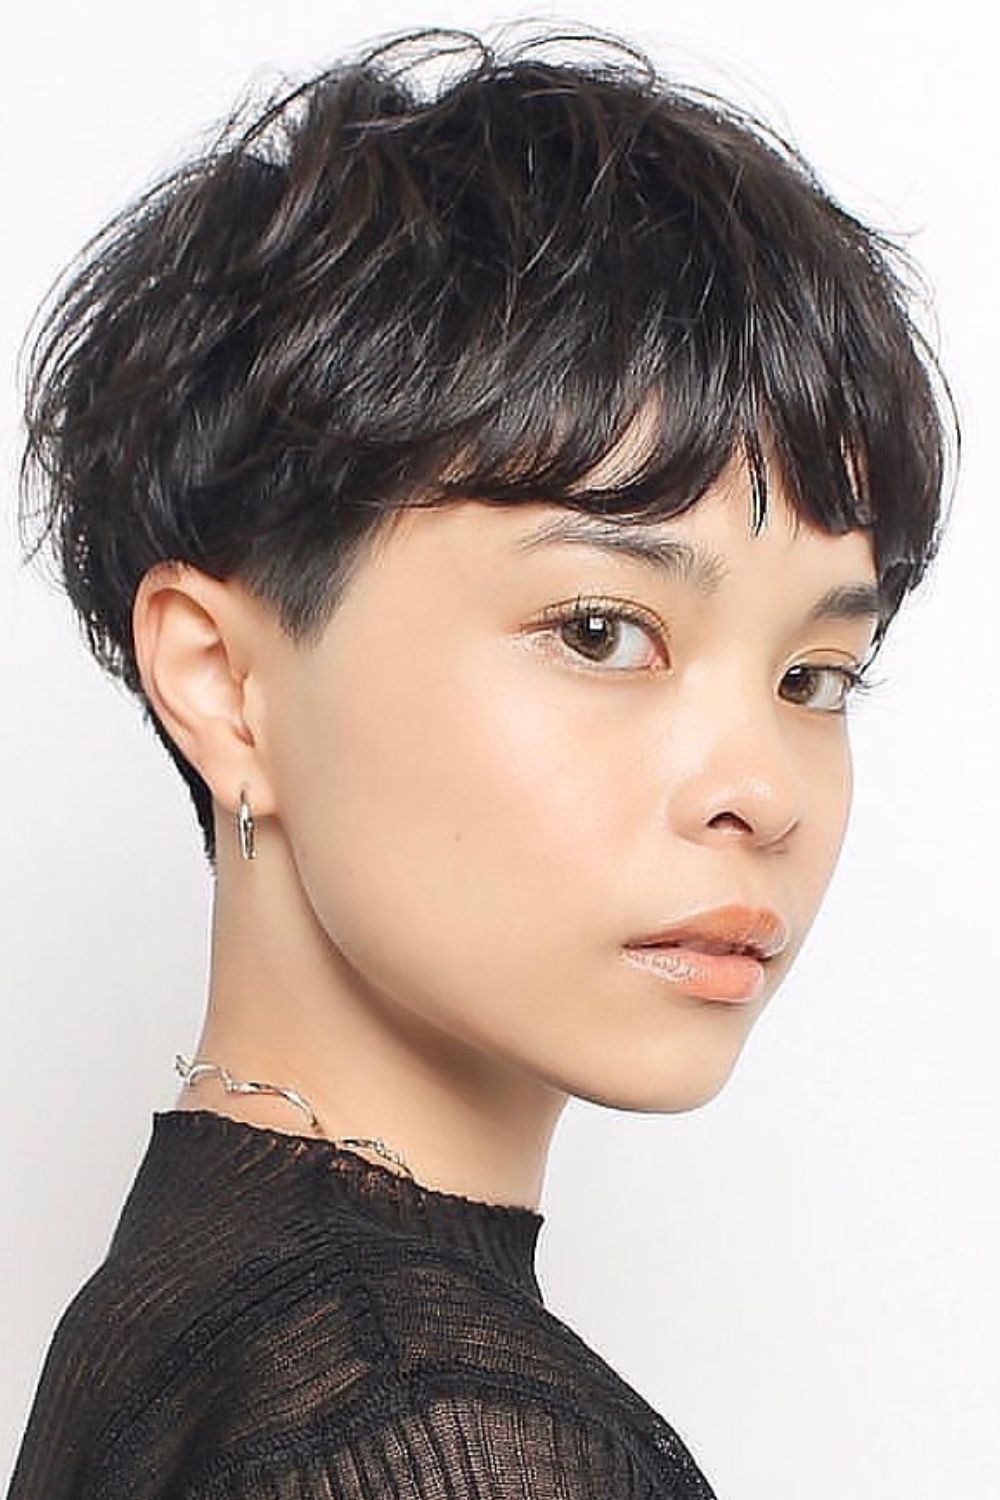 A woman with a black pixie with short bangs.